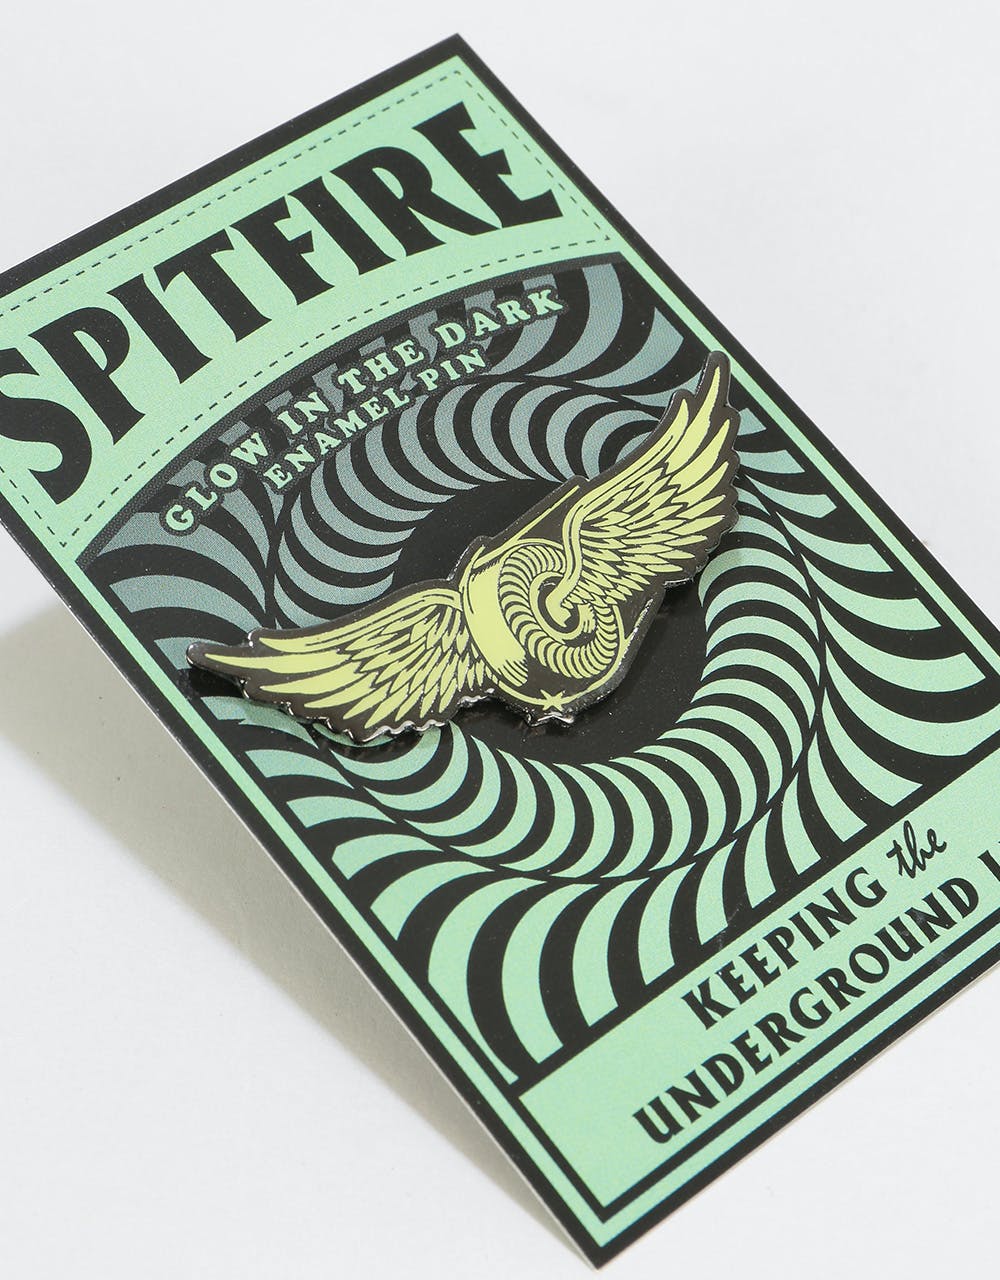 Spitfire Flying Classic Pin - Glow